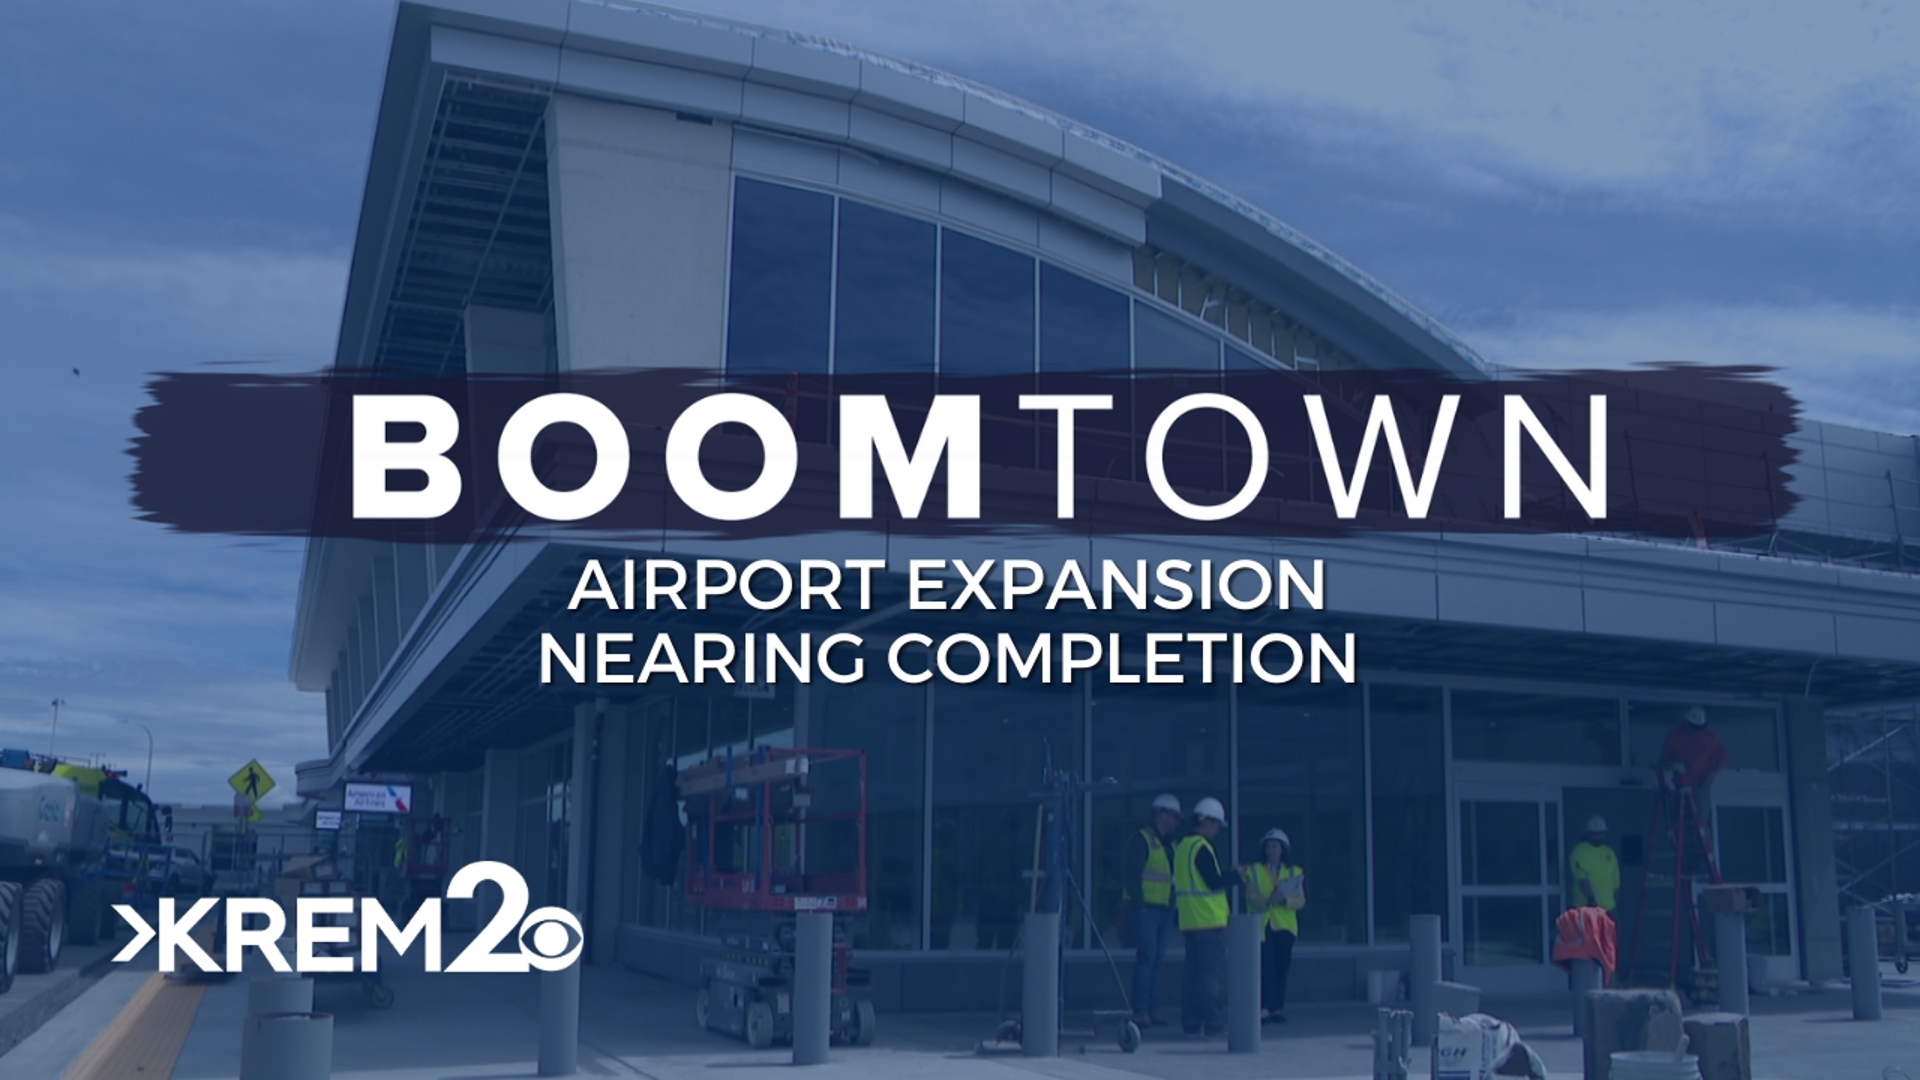 New expansion, new restaurants and more: KREM 2's Nathan Hyun previewed the latest coming to the Spokane Airport.